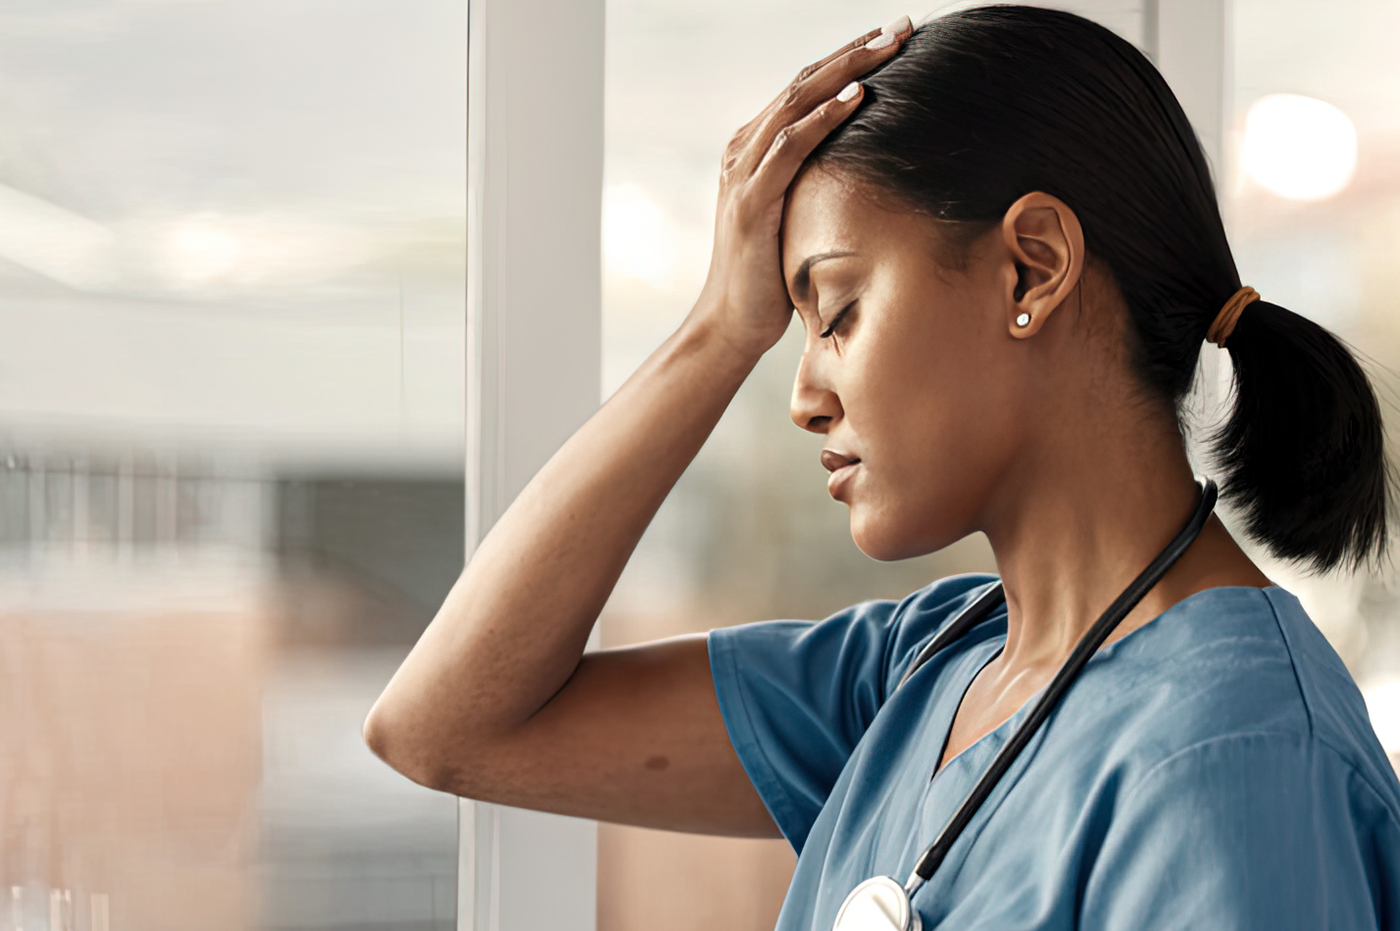 A nurse who looks to be frustrated or not feeling well.